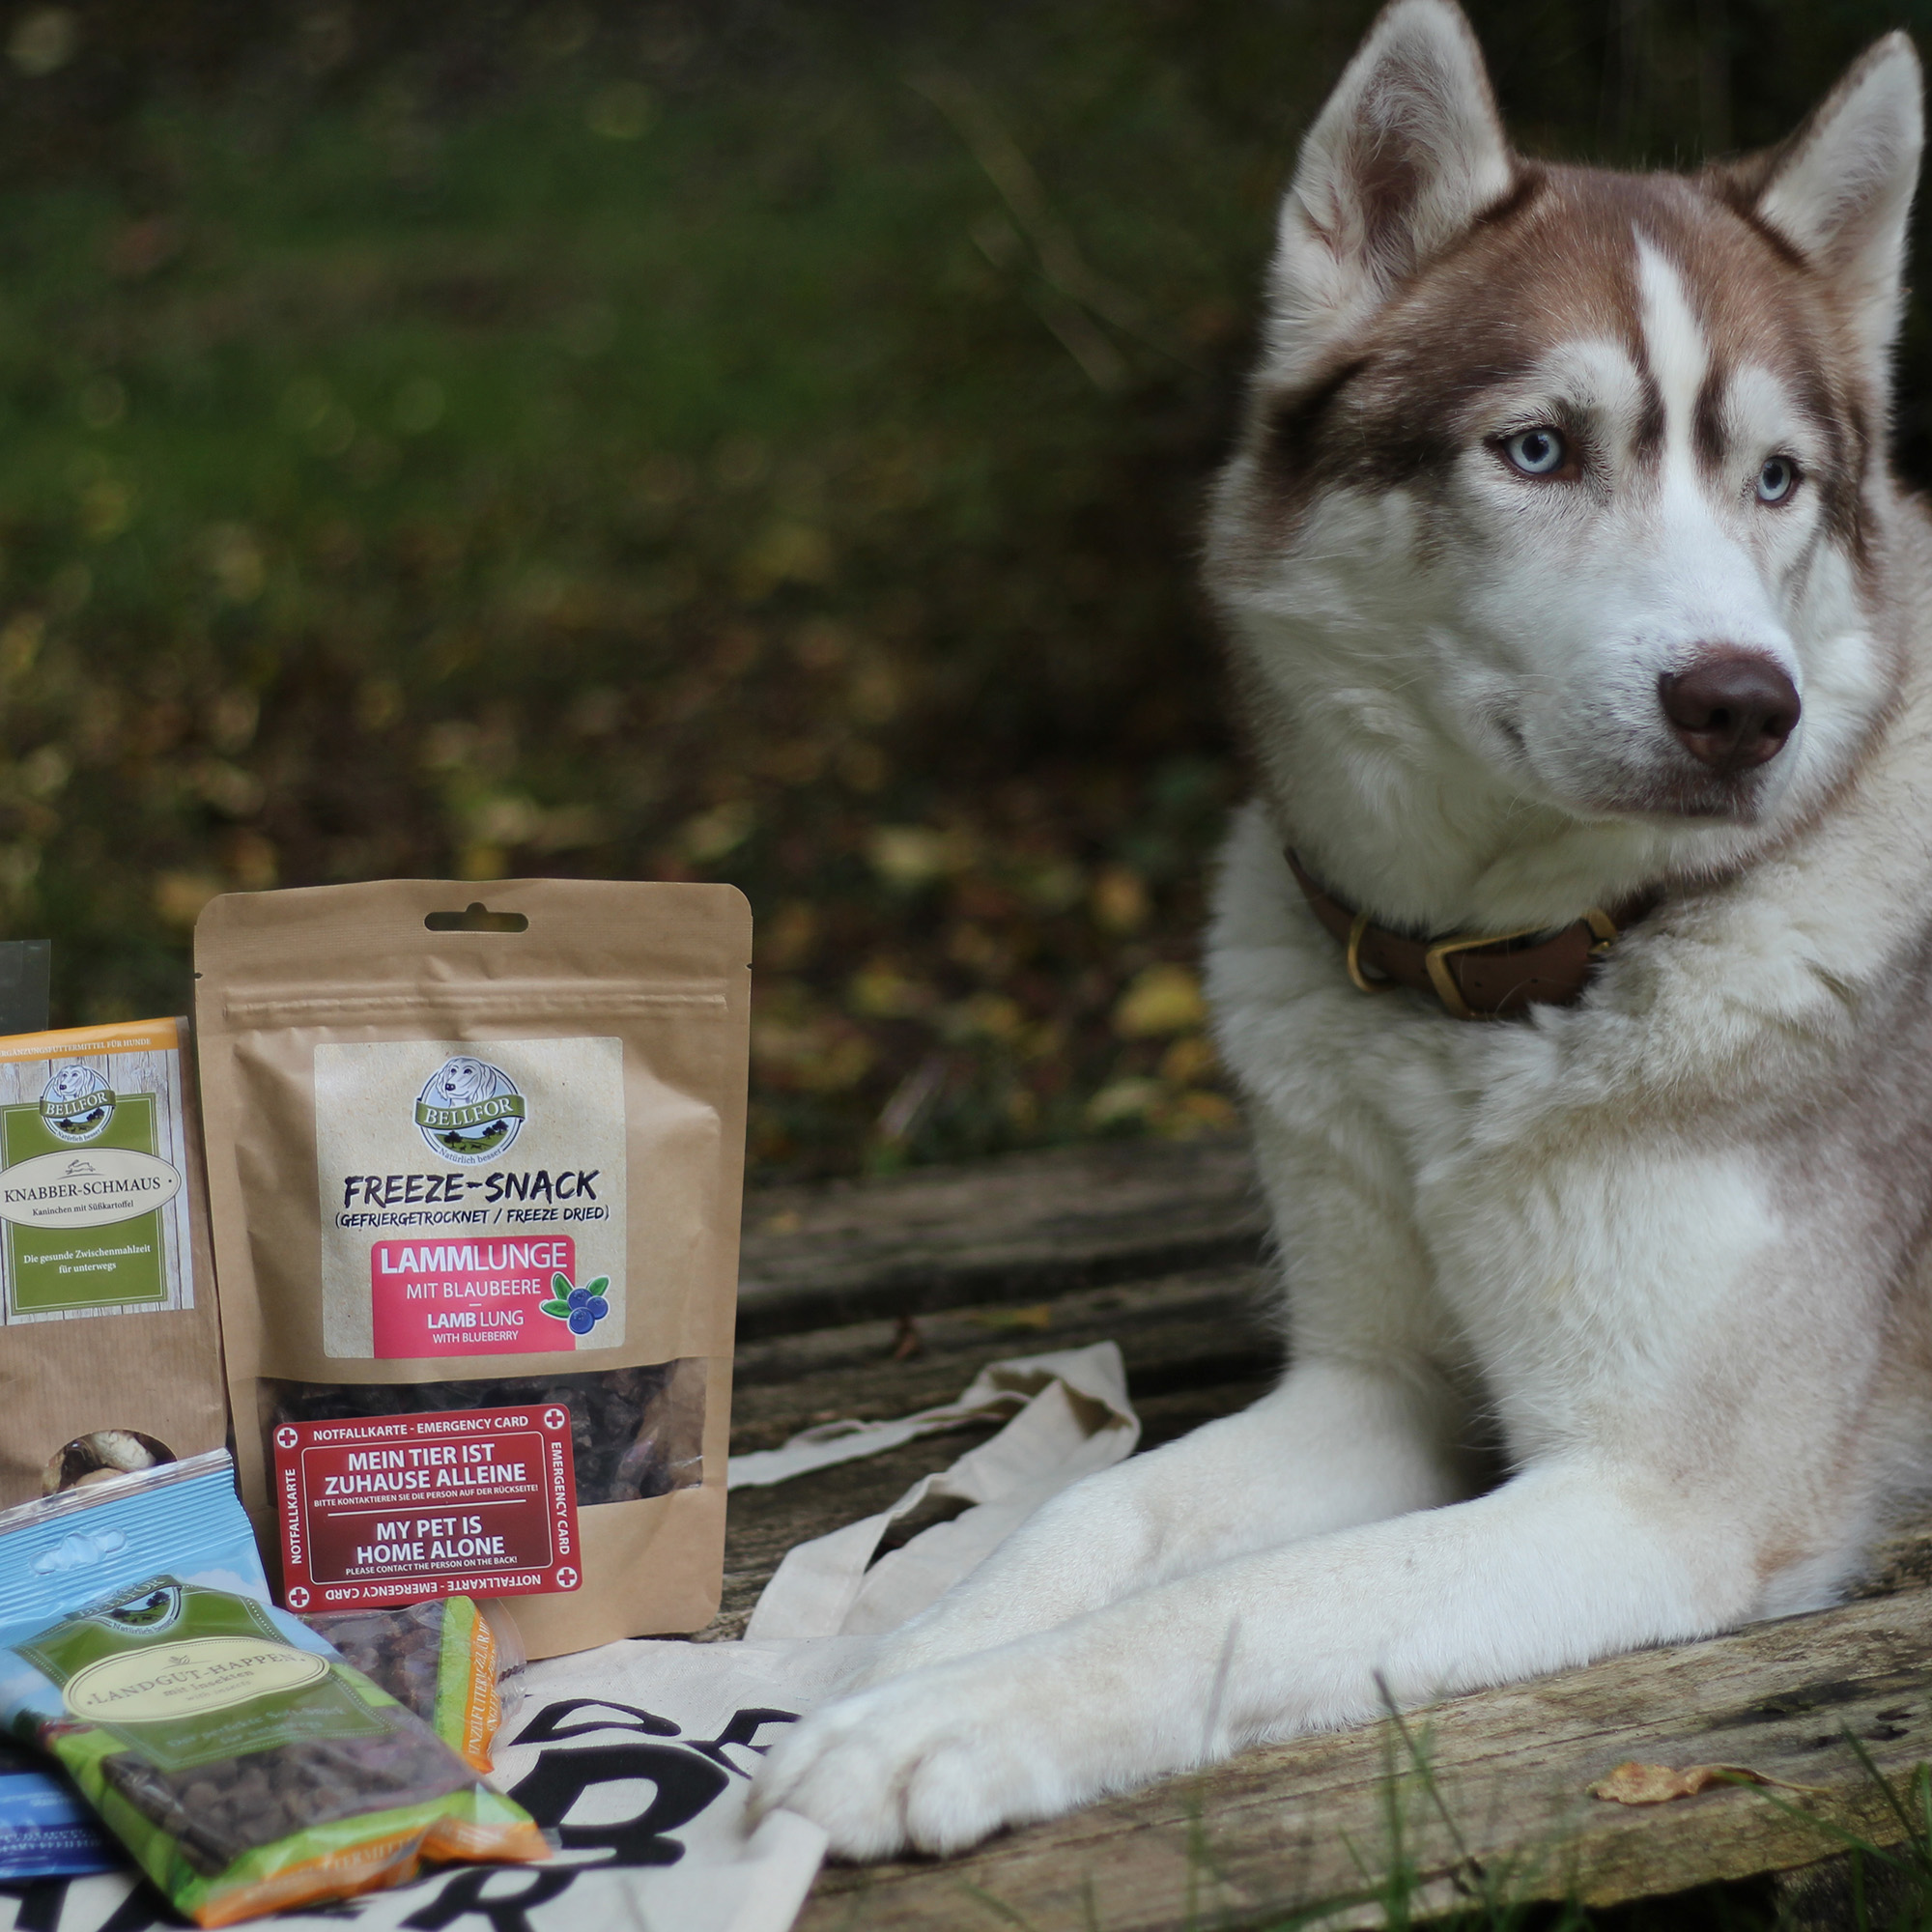 Bellfor dog treats for quality-conscious dog owners